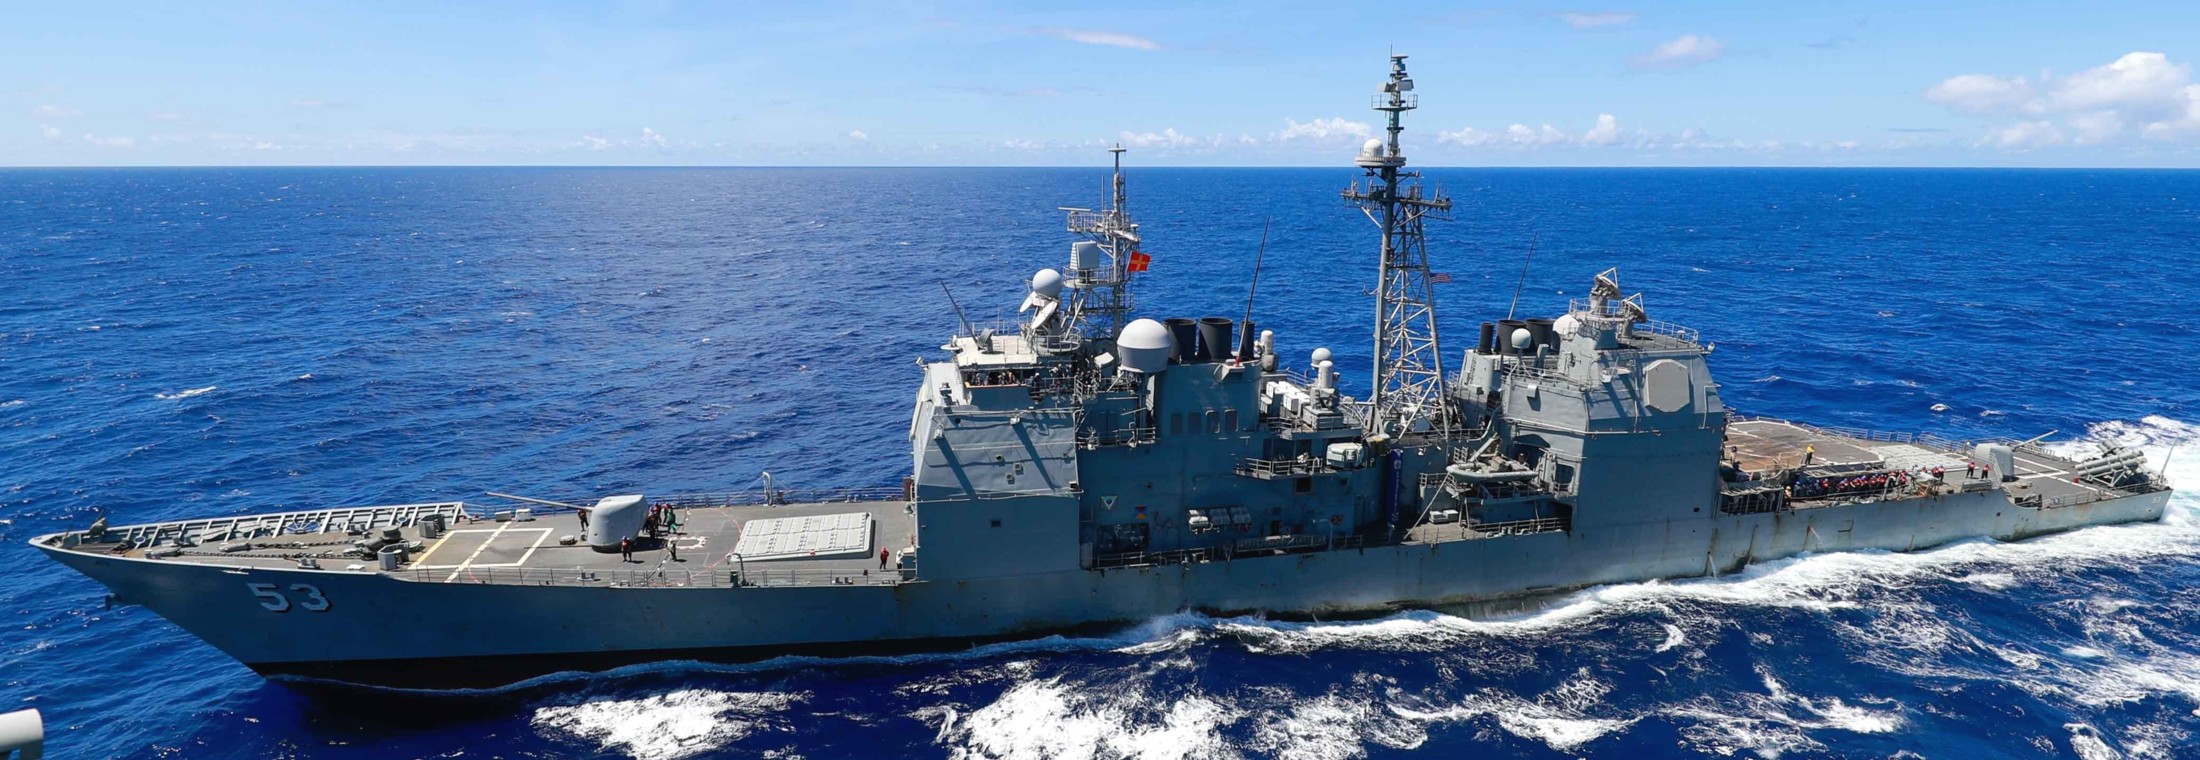 cg-53 uss mobile bay ticonderoga class guided missile cruiser aegis us navy 149